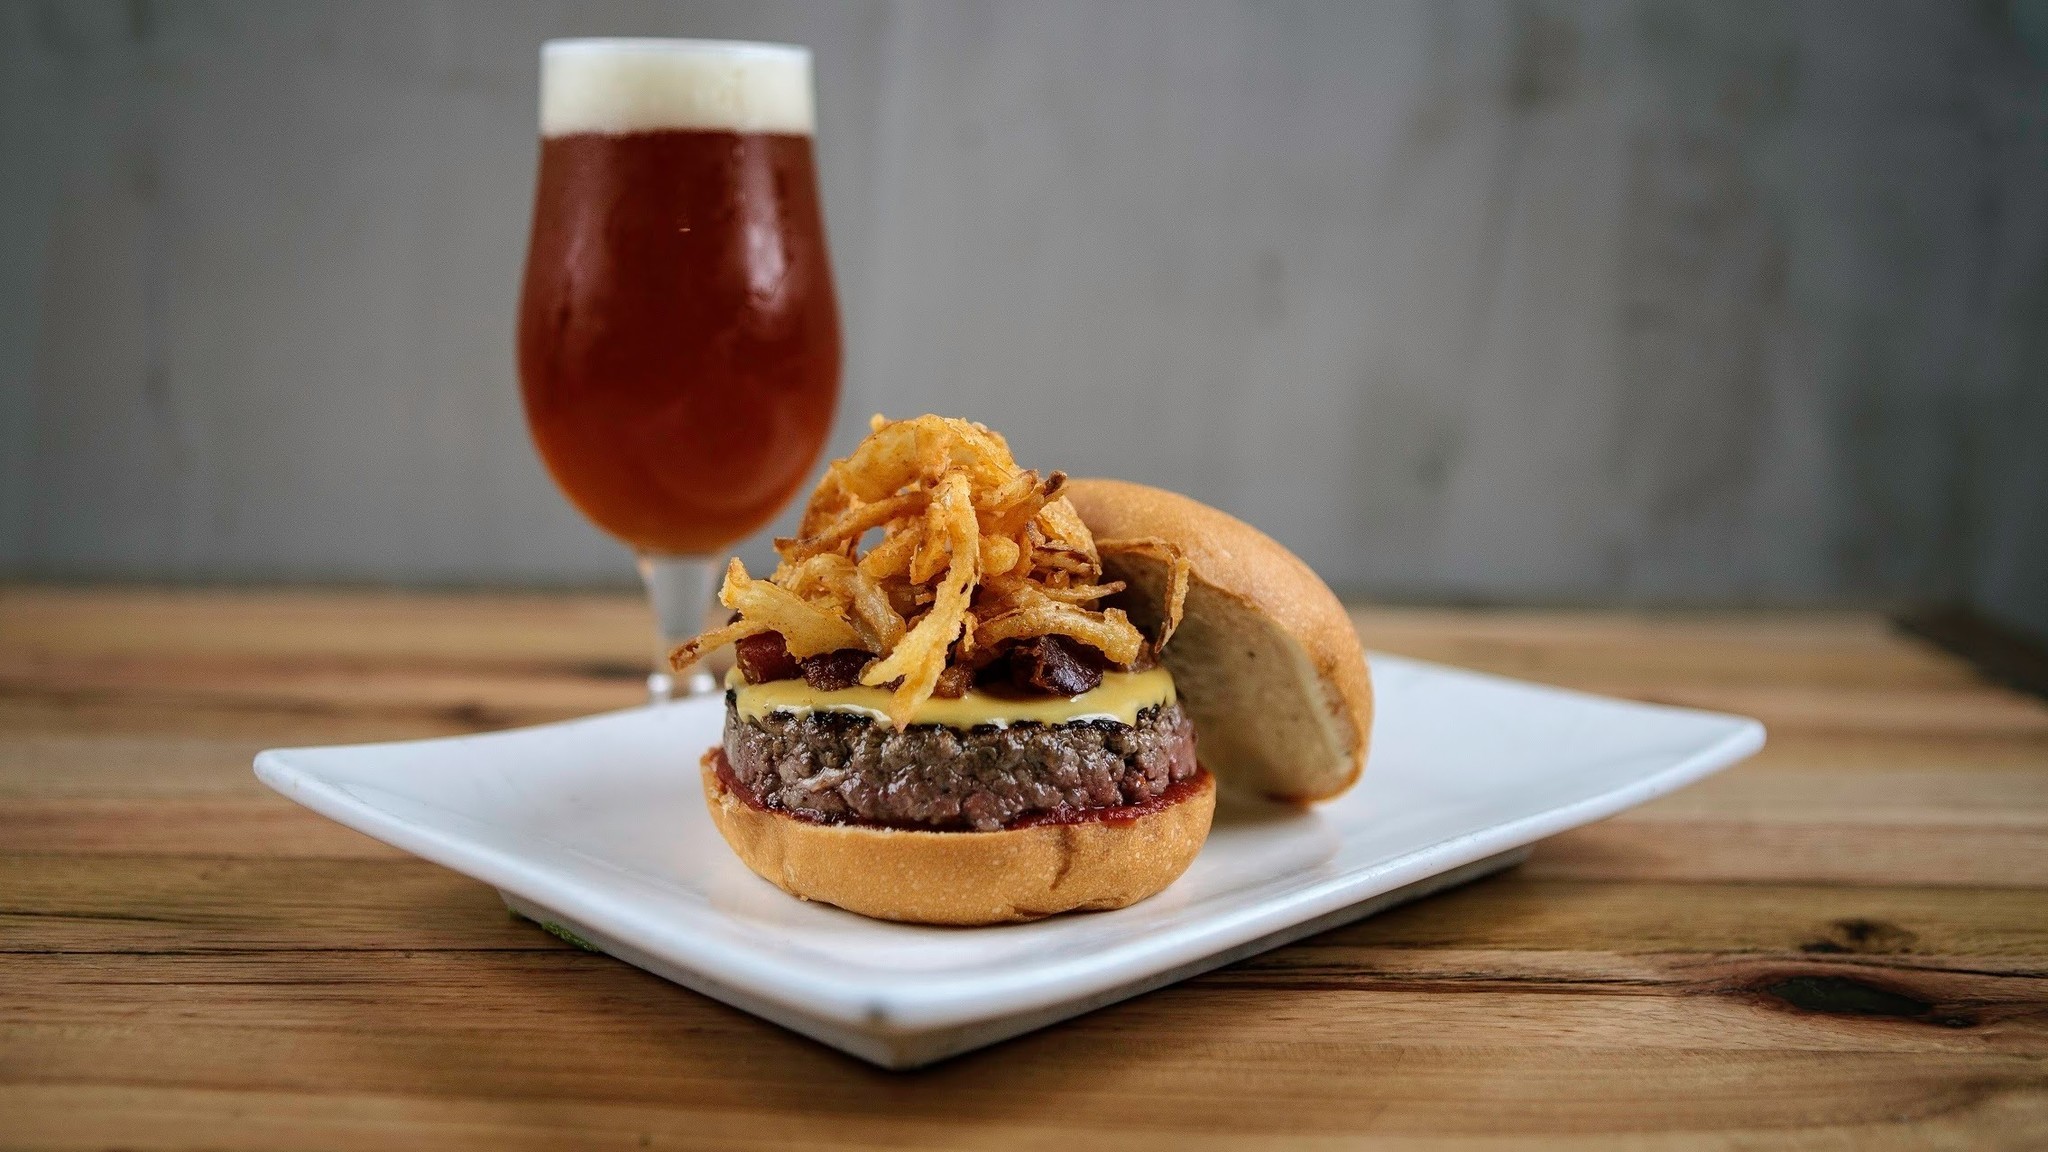 GQ magazine ranked the Manly at Umami Burger the best burger in the country.